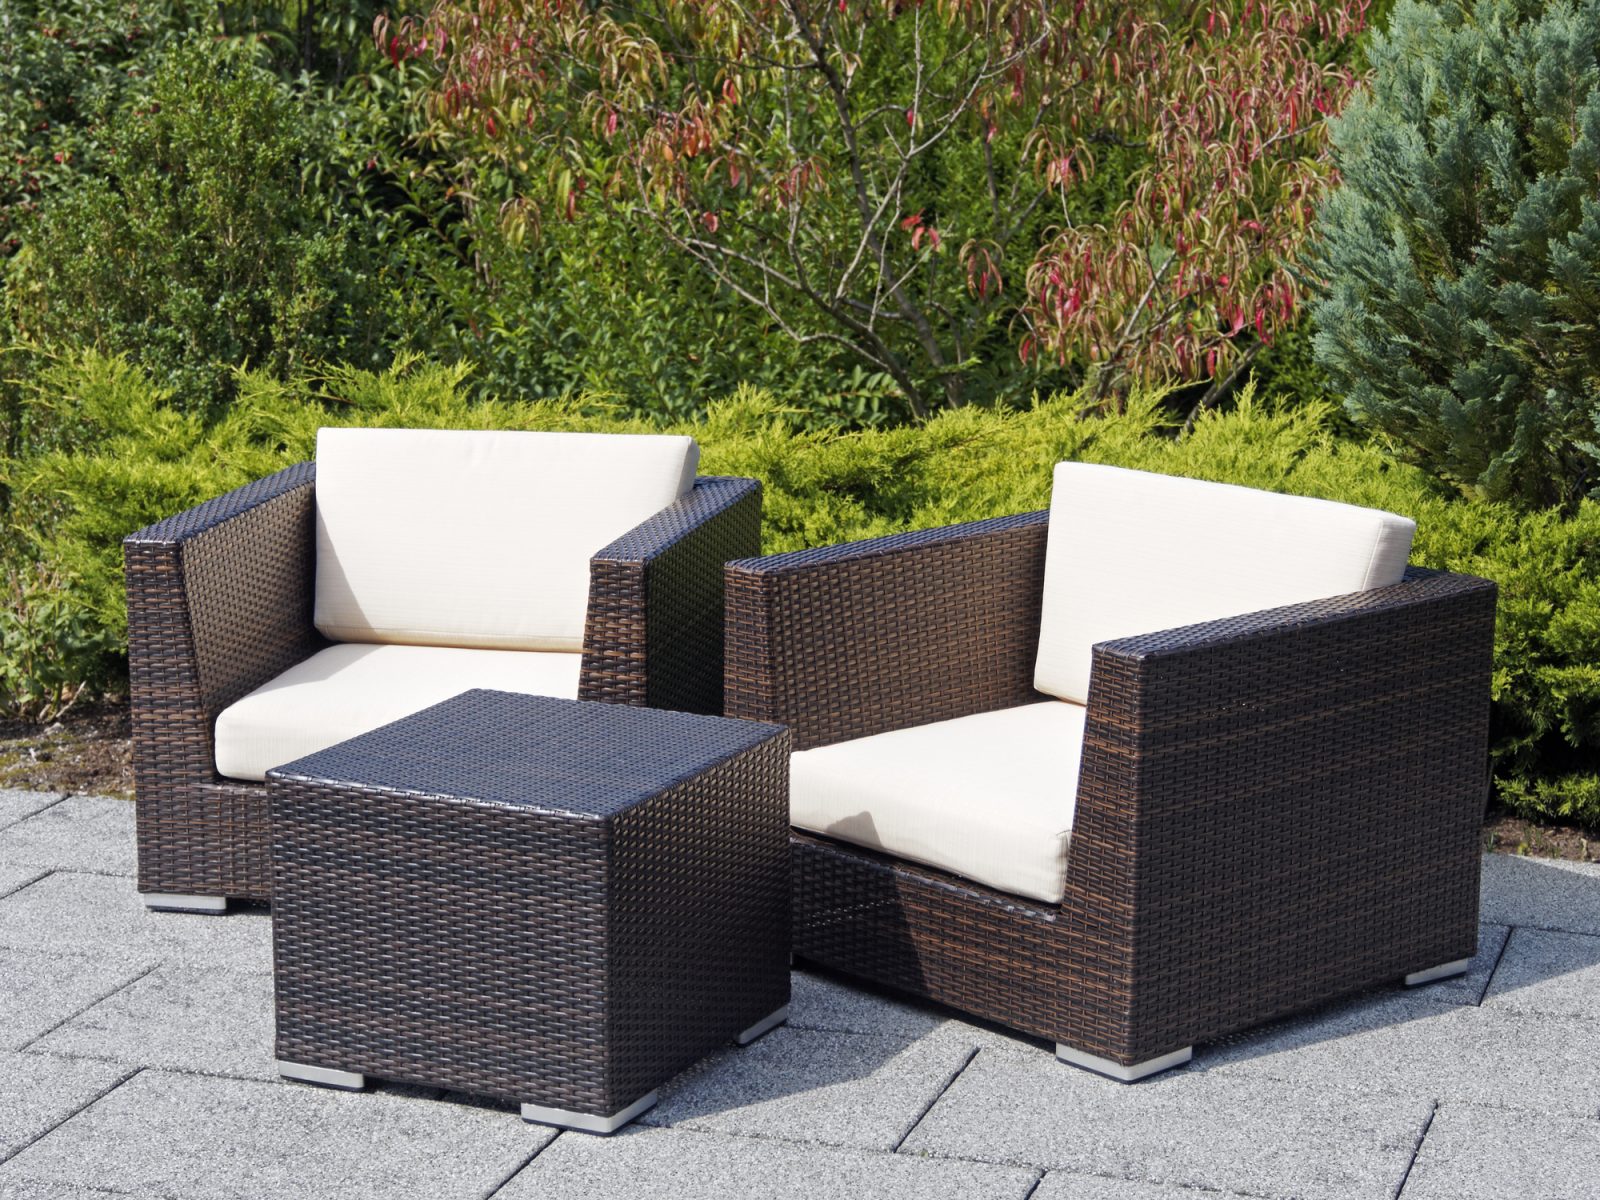 5 Tips For Choosing Outdoor Furniture